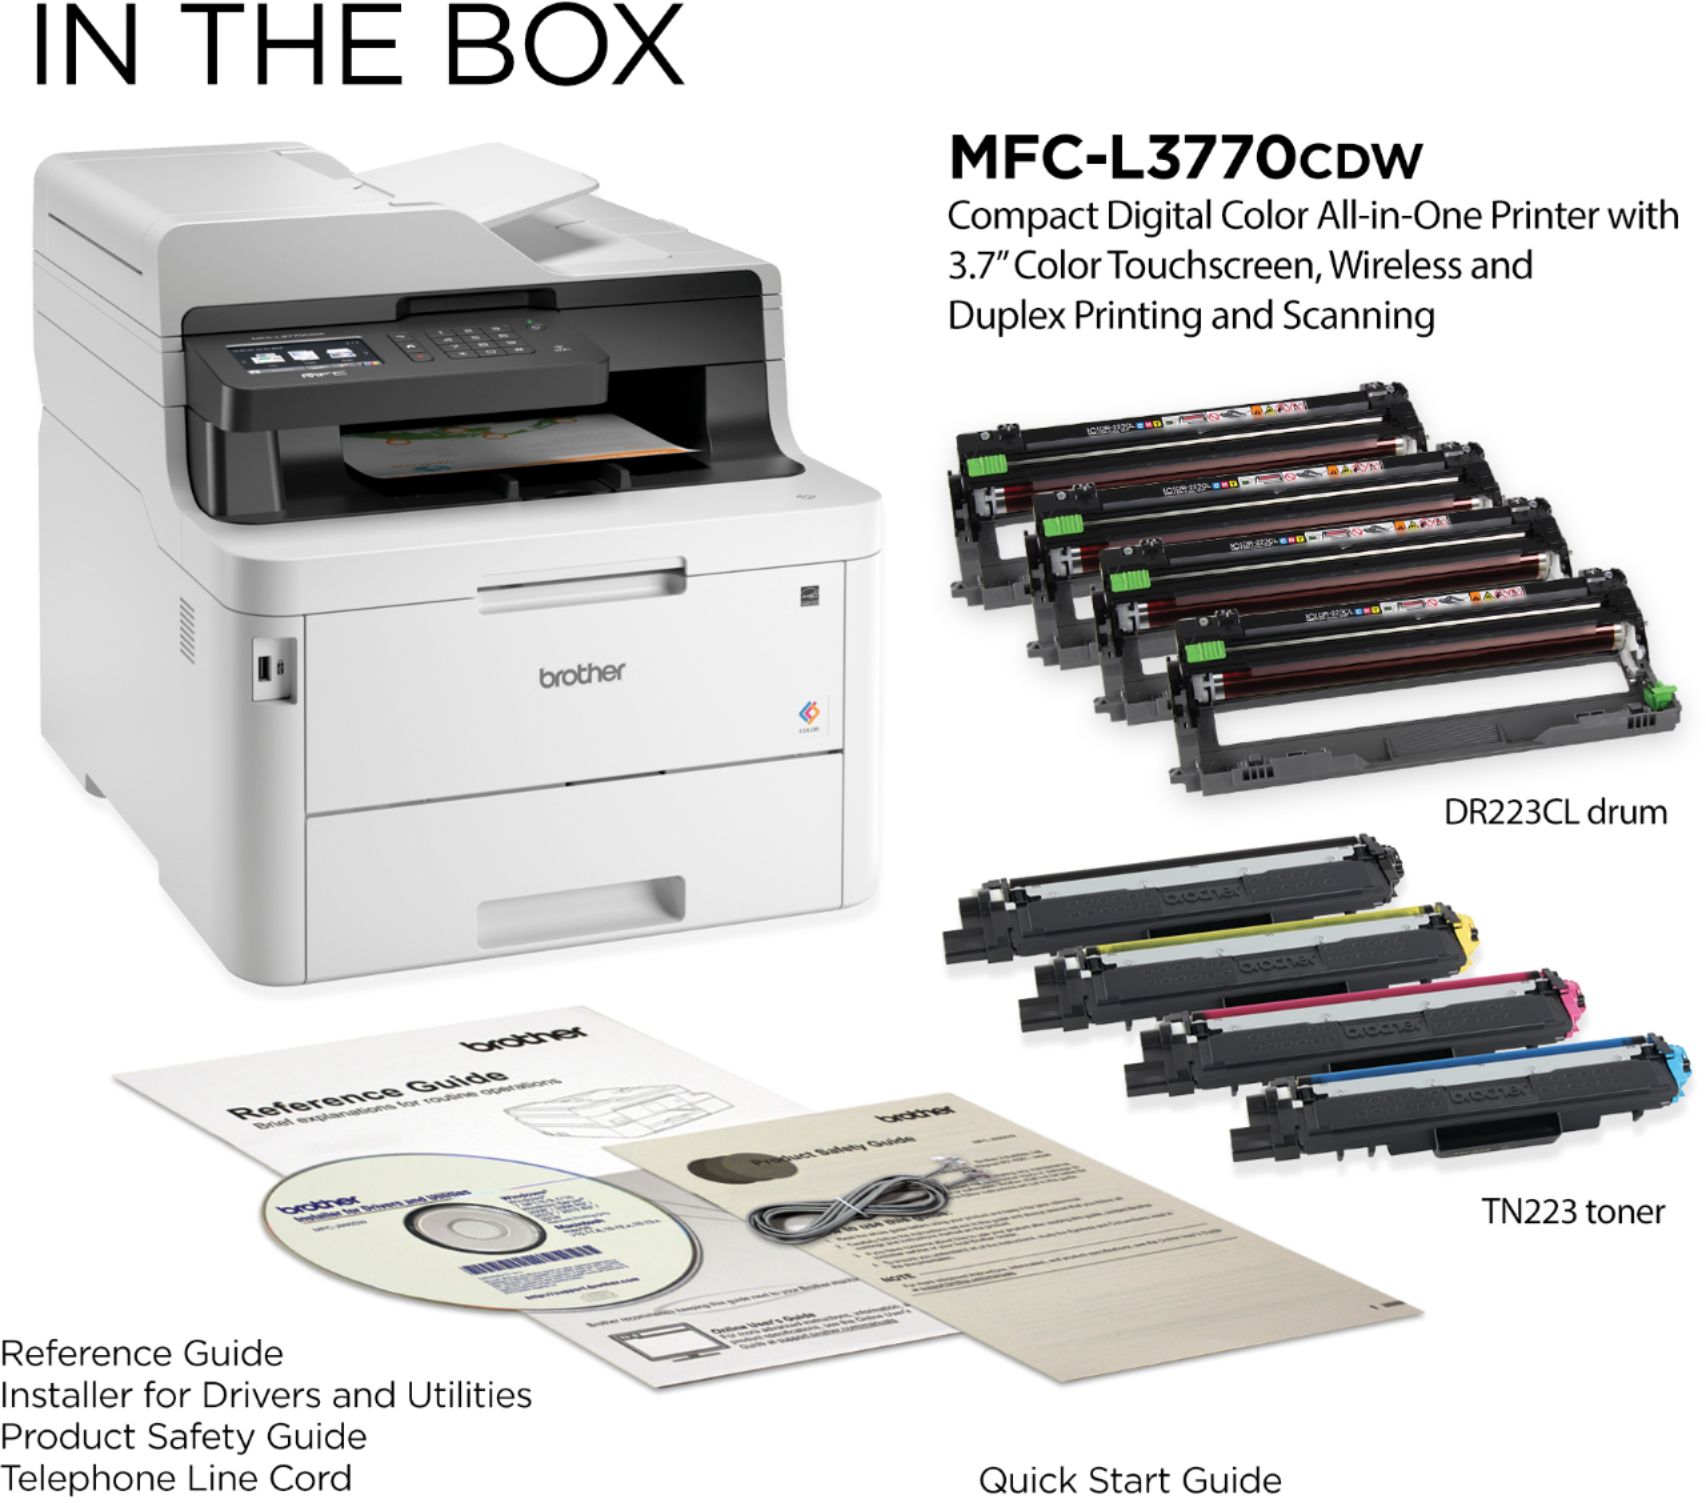 Brother MFC-L3770CDW Printer Review